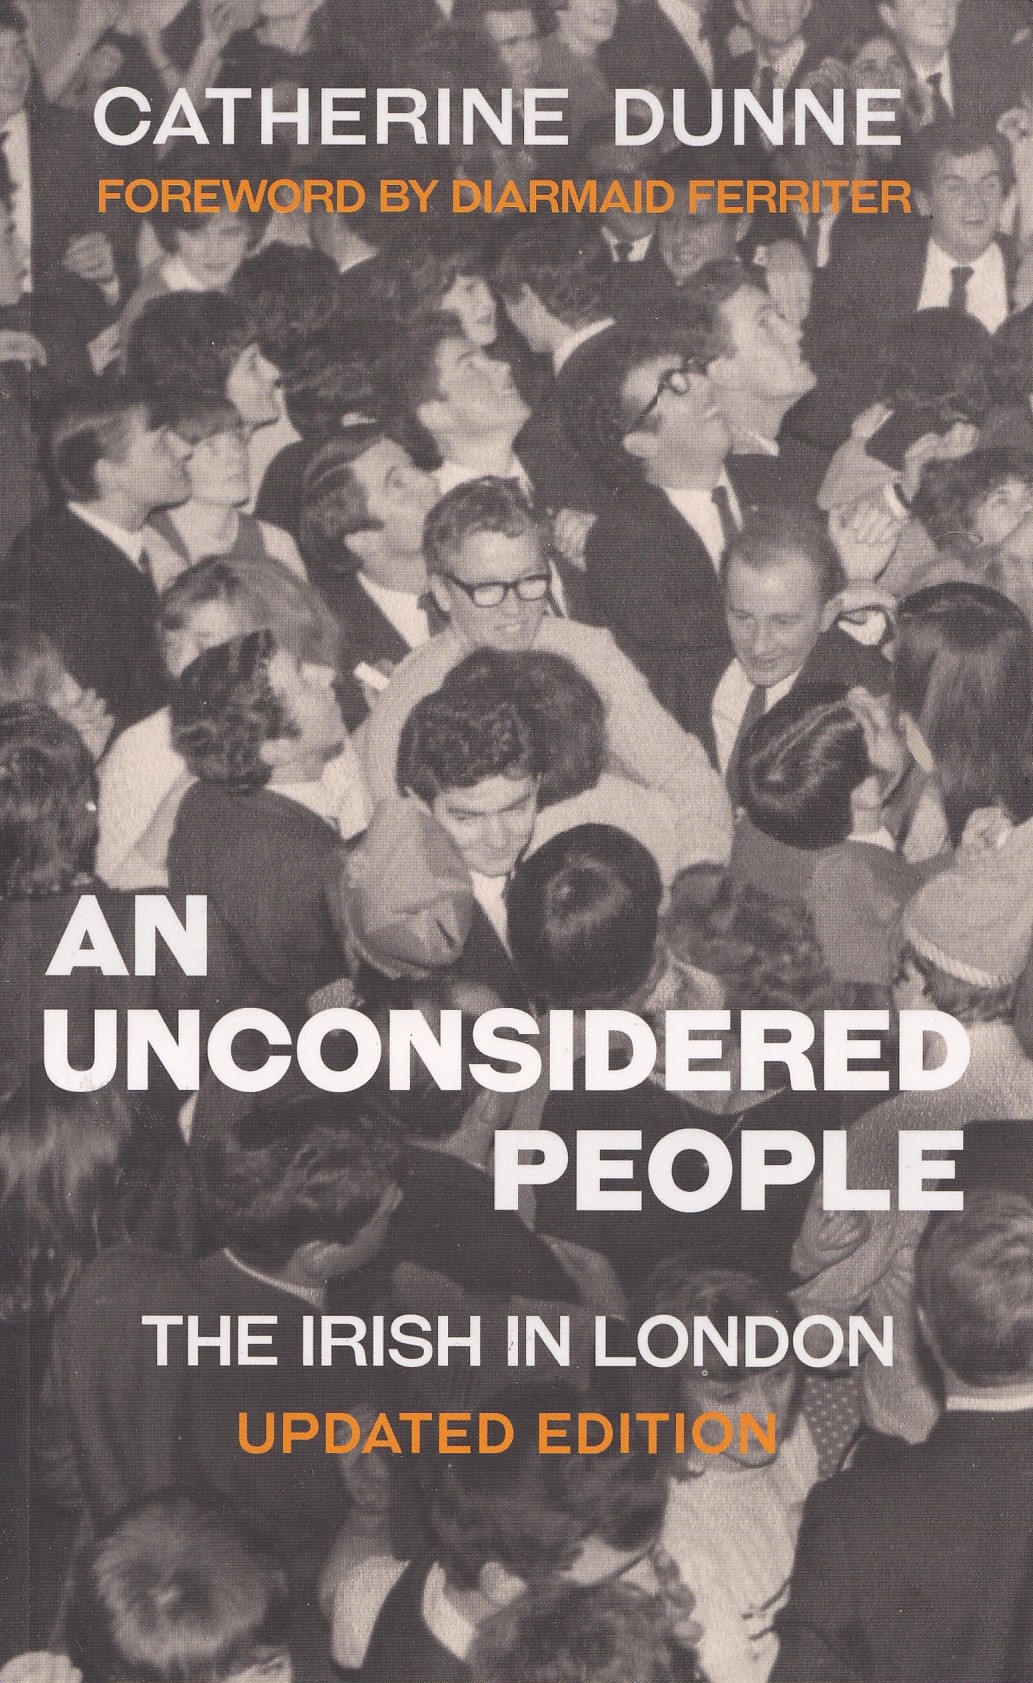 An Unconsidered People: The Irish in London – Updated Edition by Catherine Dunne